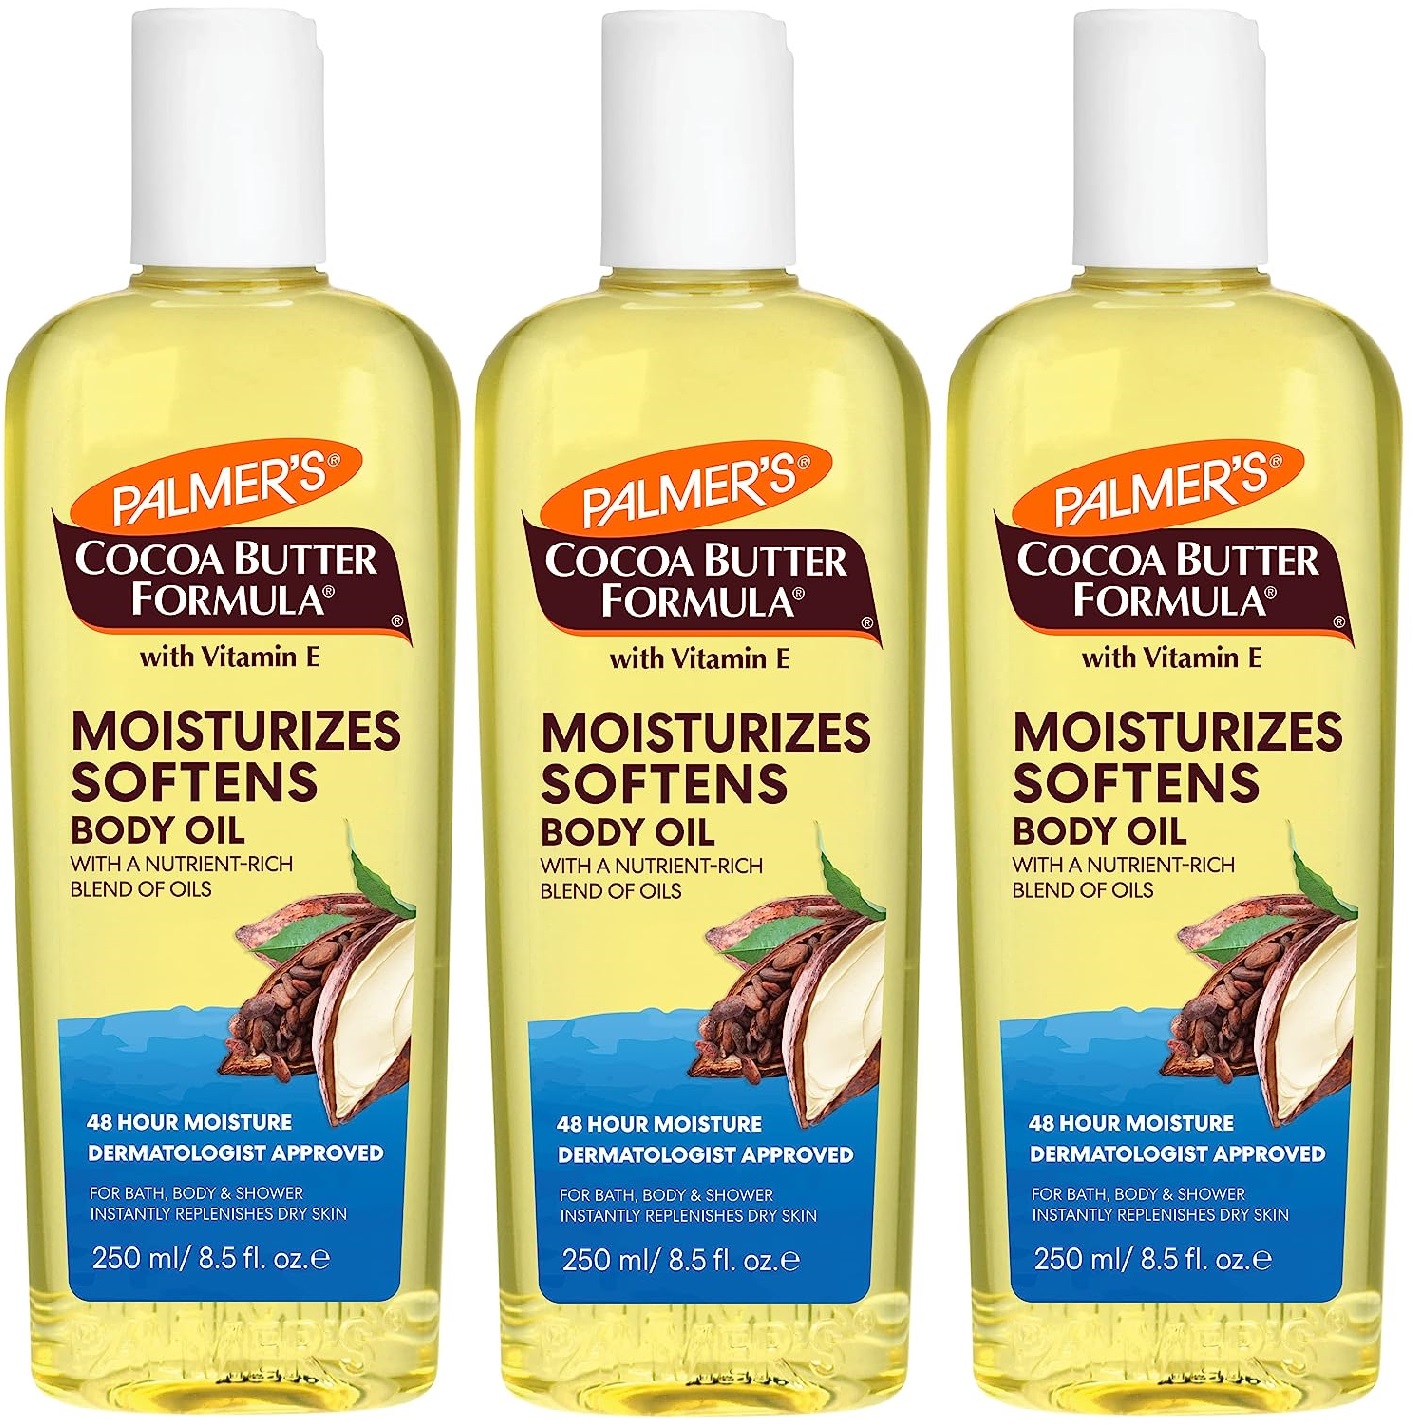 8.5-Oz Palmer's Cocoa Butter Moisturizing Body Oil w/ Vitamin E 3 for $14.30 ($4.77 each) w/ S&S + Free Shipping w/ Prime or on $35+